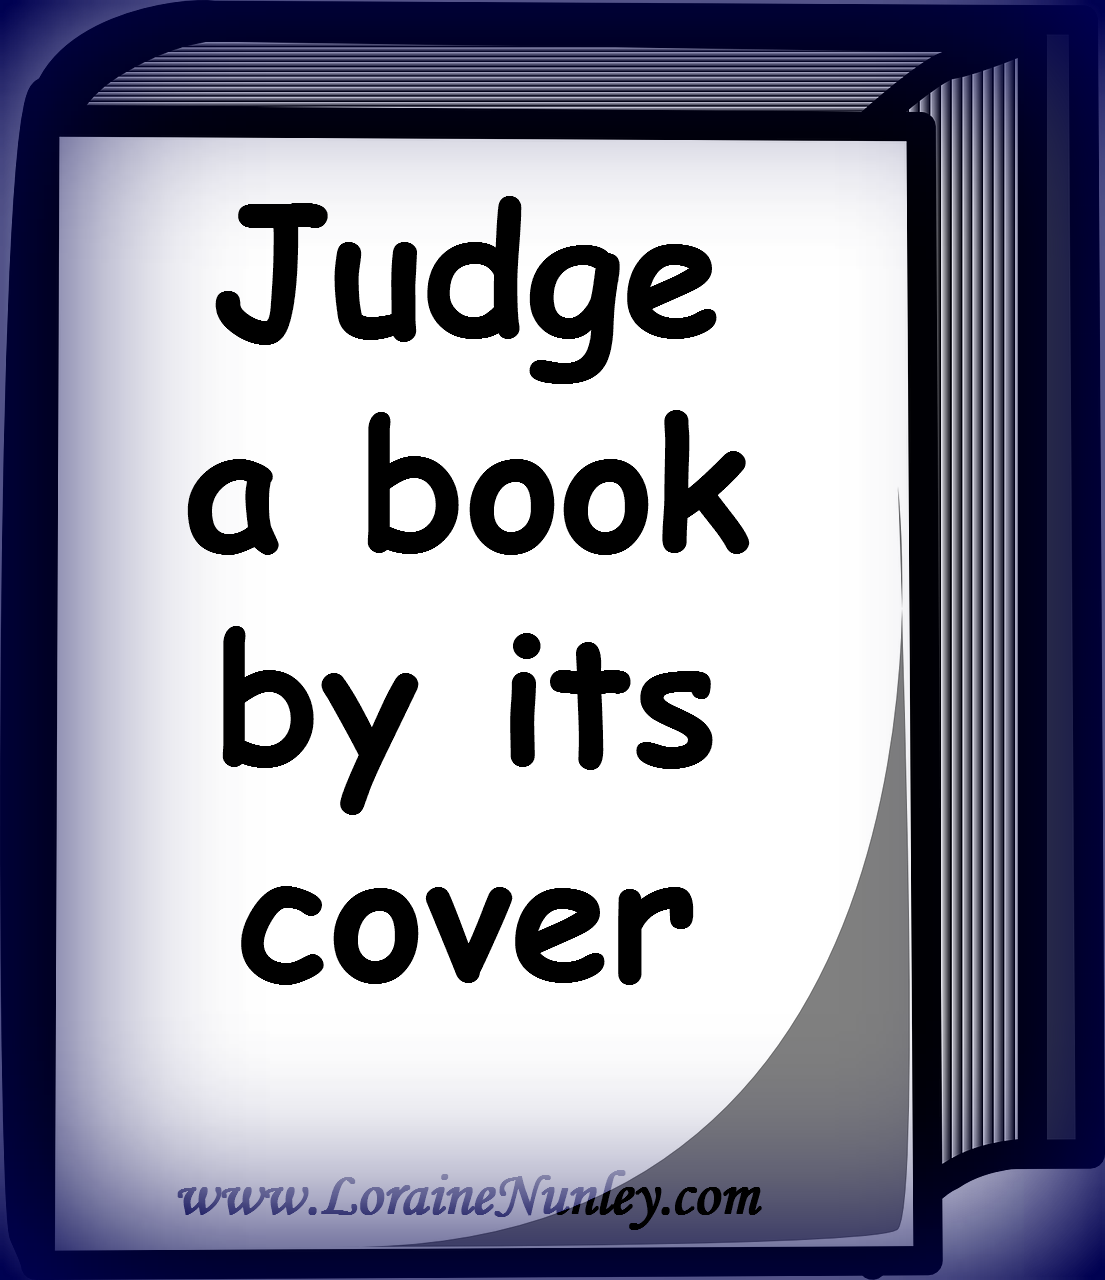 Judge a book by its cover